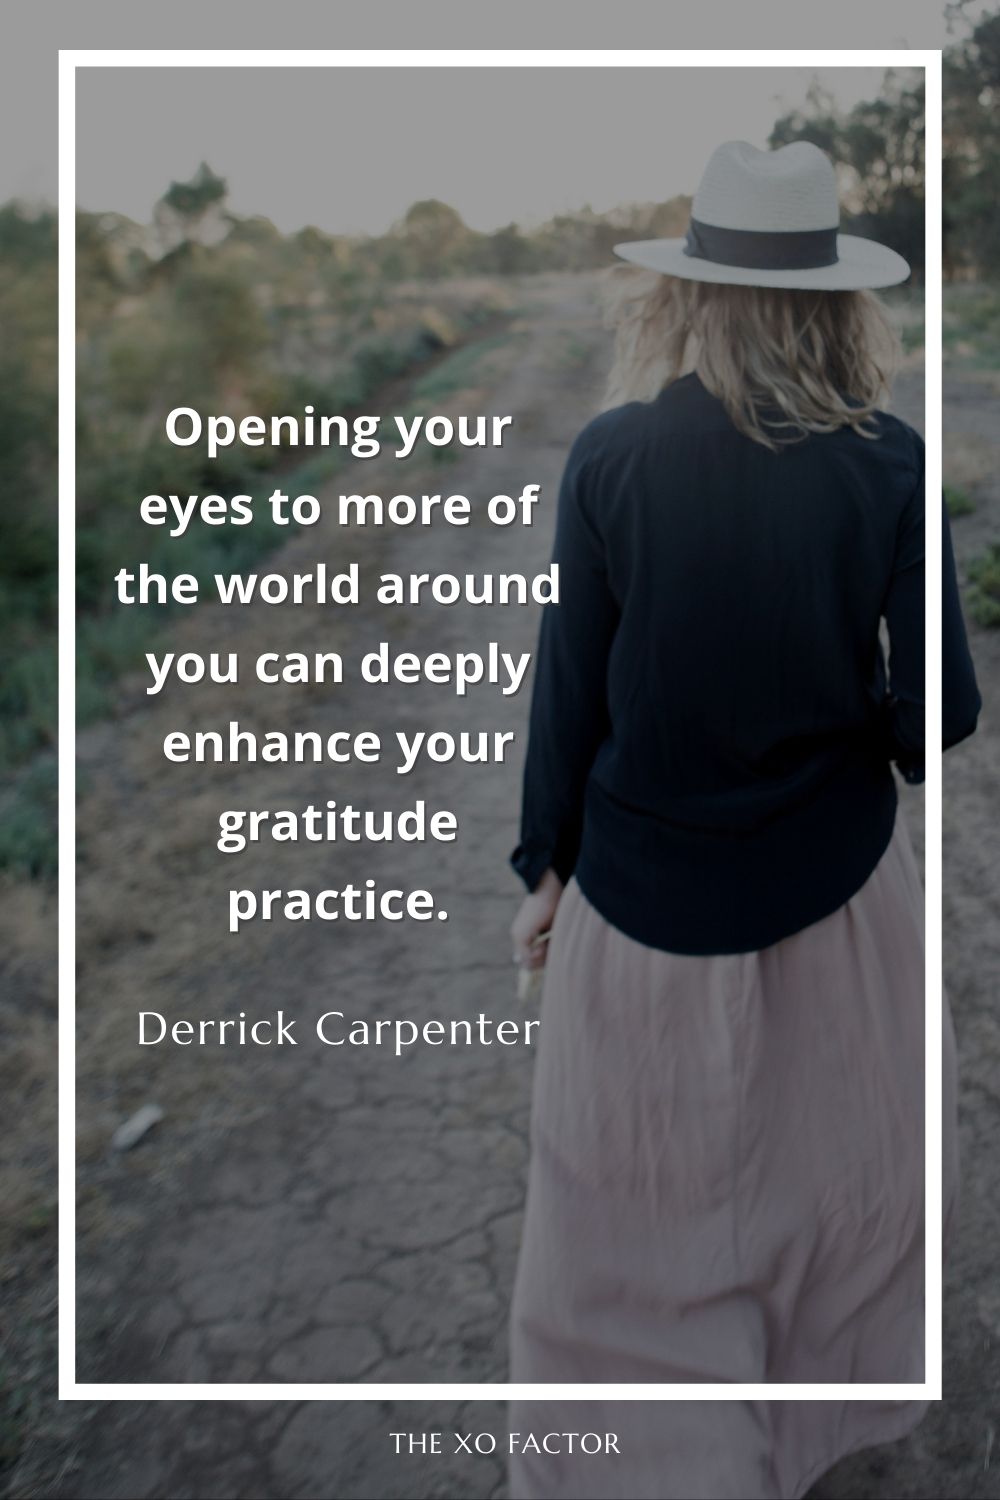 Opening your eyes to more of the world around you can deeply enhance your gratitude practice.